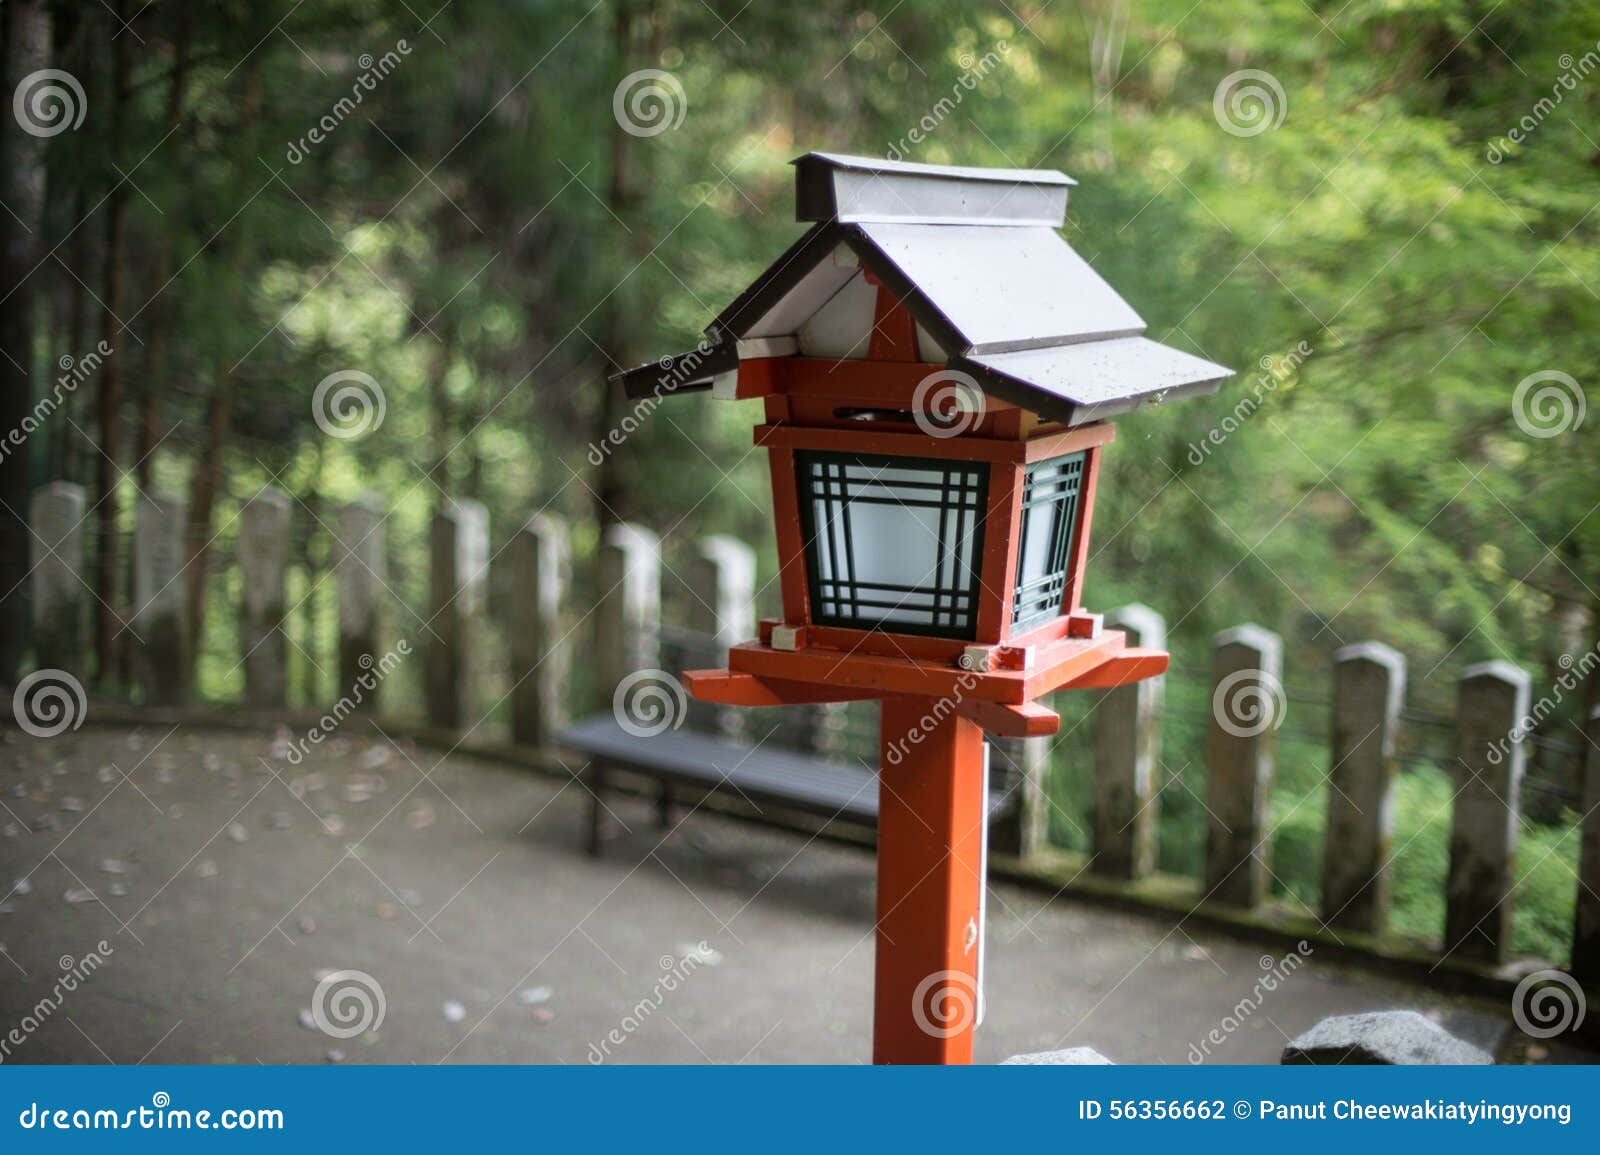 Japan traditional lamp stock photo. Image of background - 56356662